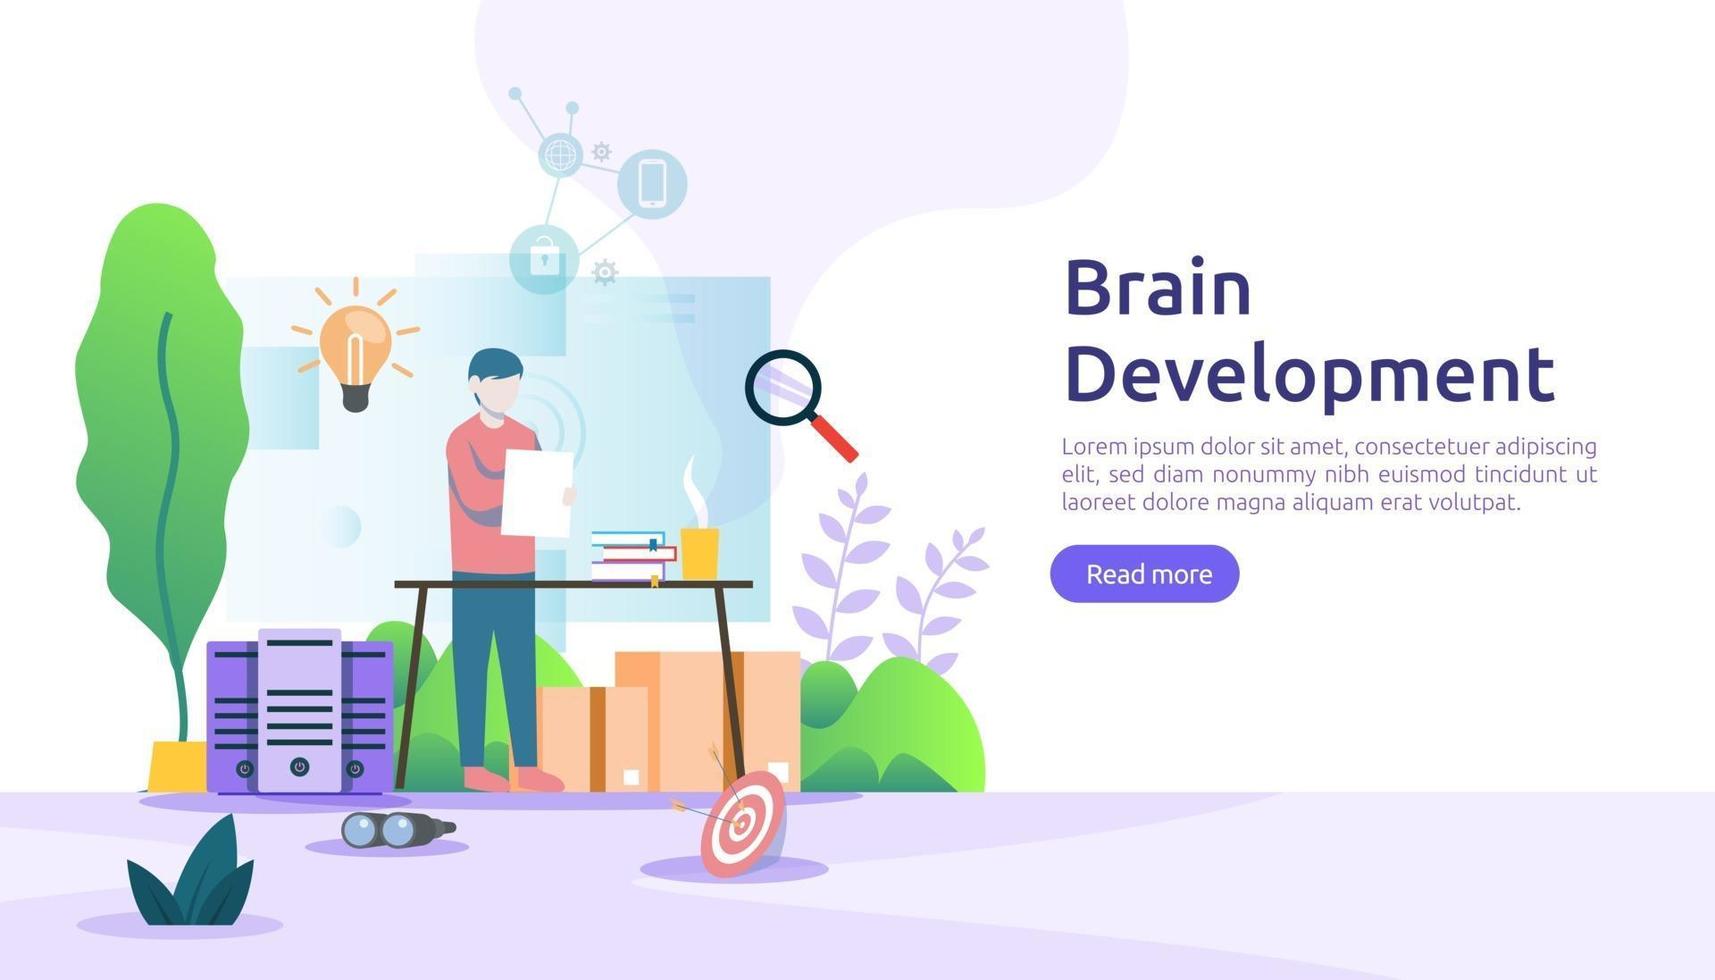 illustration flat design of thinking creative, brain development and mental rest with people character. template for web landing page, banner, presentation, social, poster, promotion or print media vector